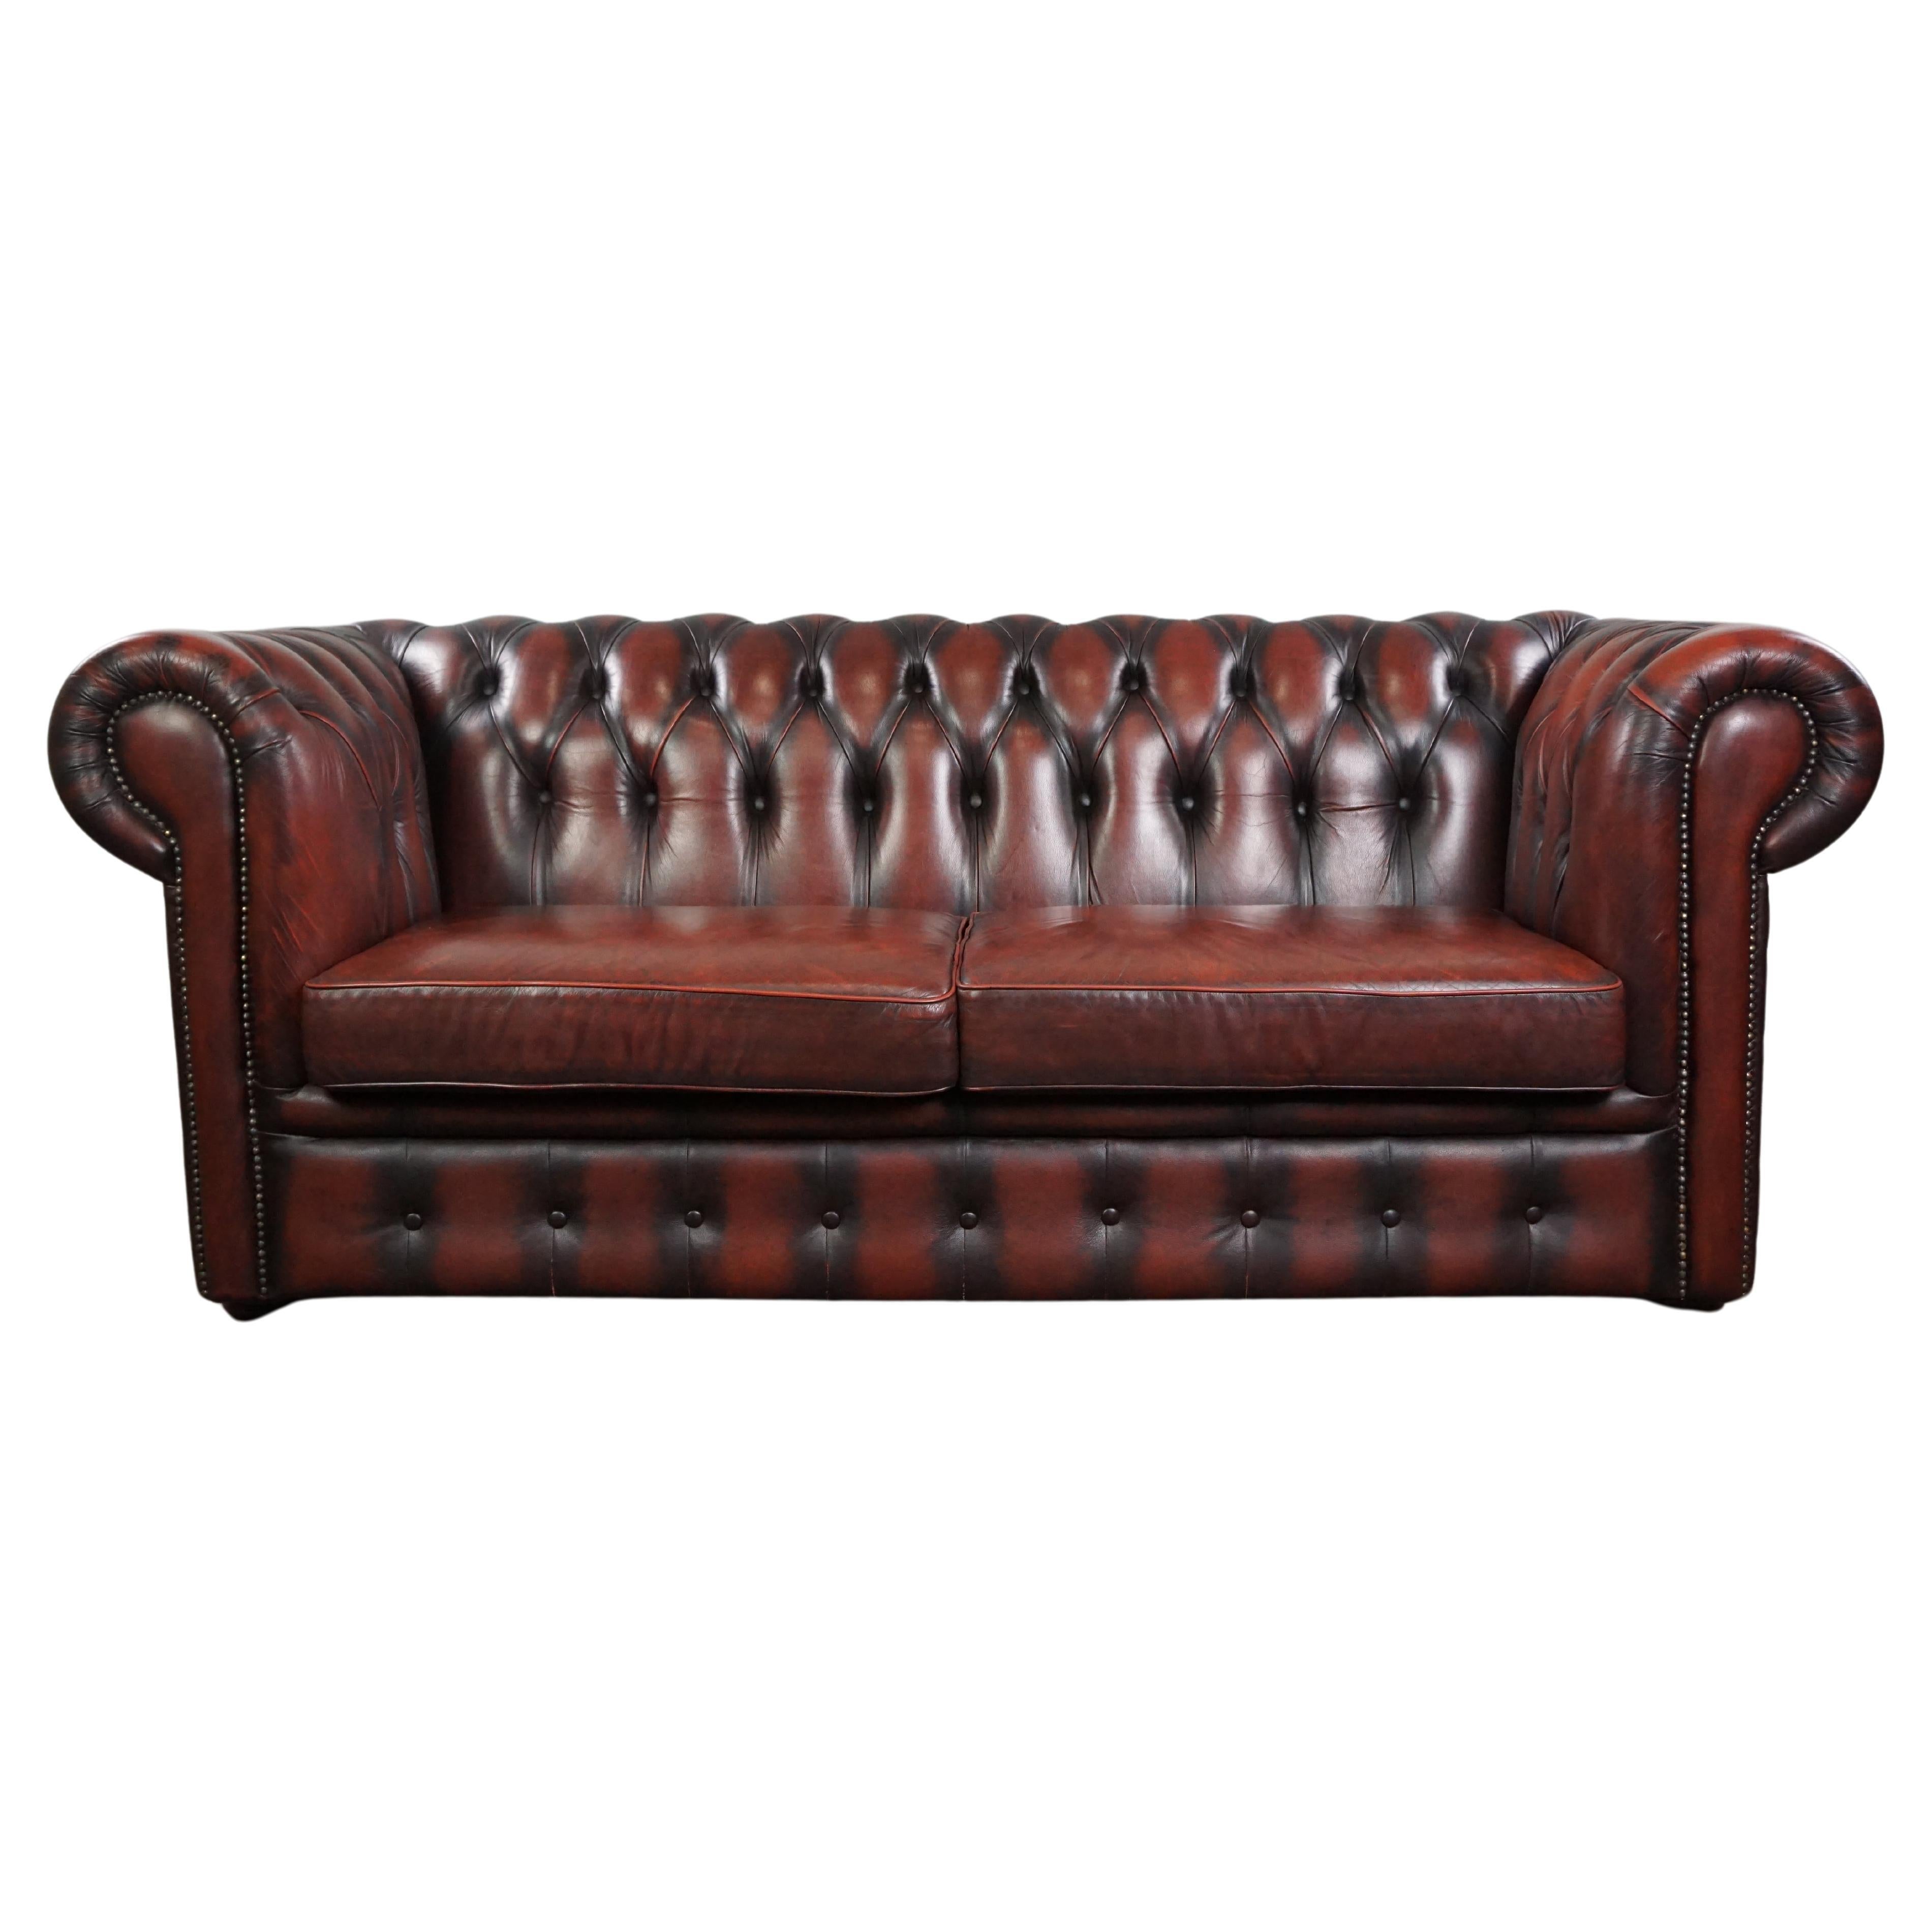 Insanely farbenfrohes Chesterfield-Sofa aus rotem Kuhleder in Rindsleder, geräumig, 2 Sitze